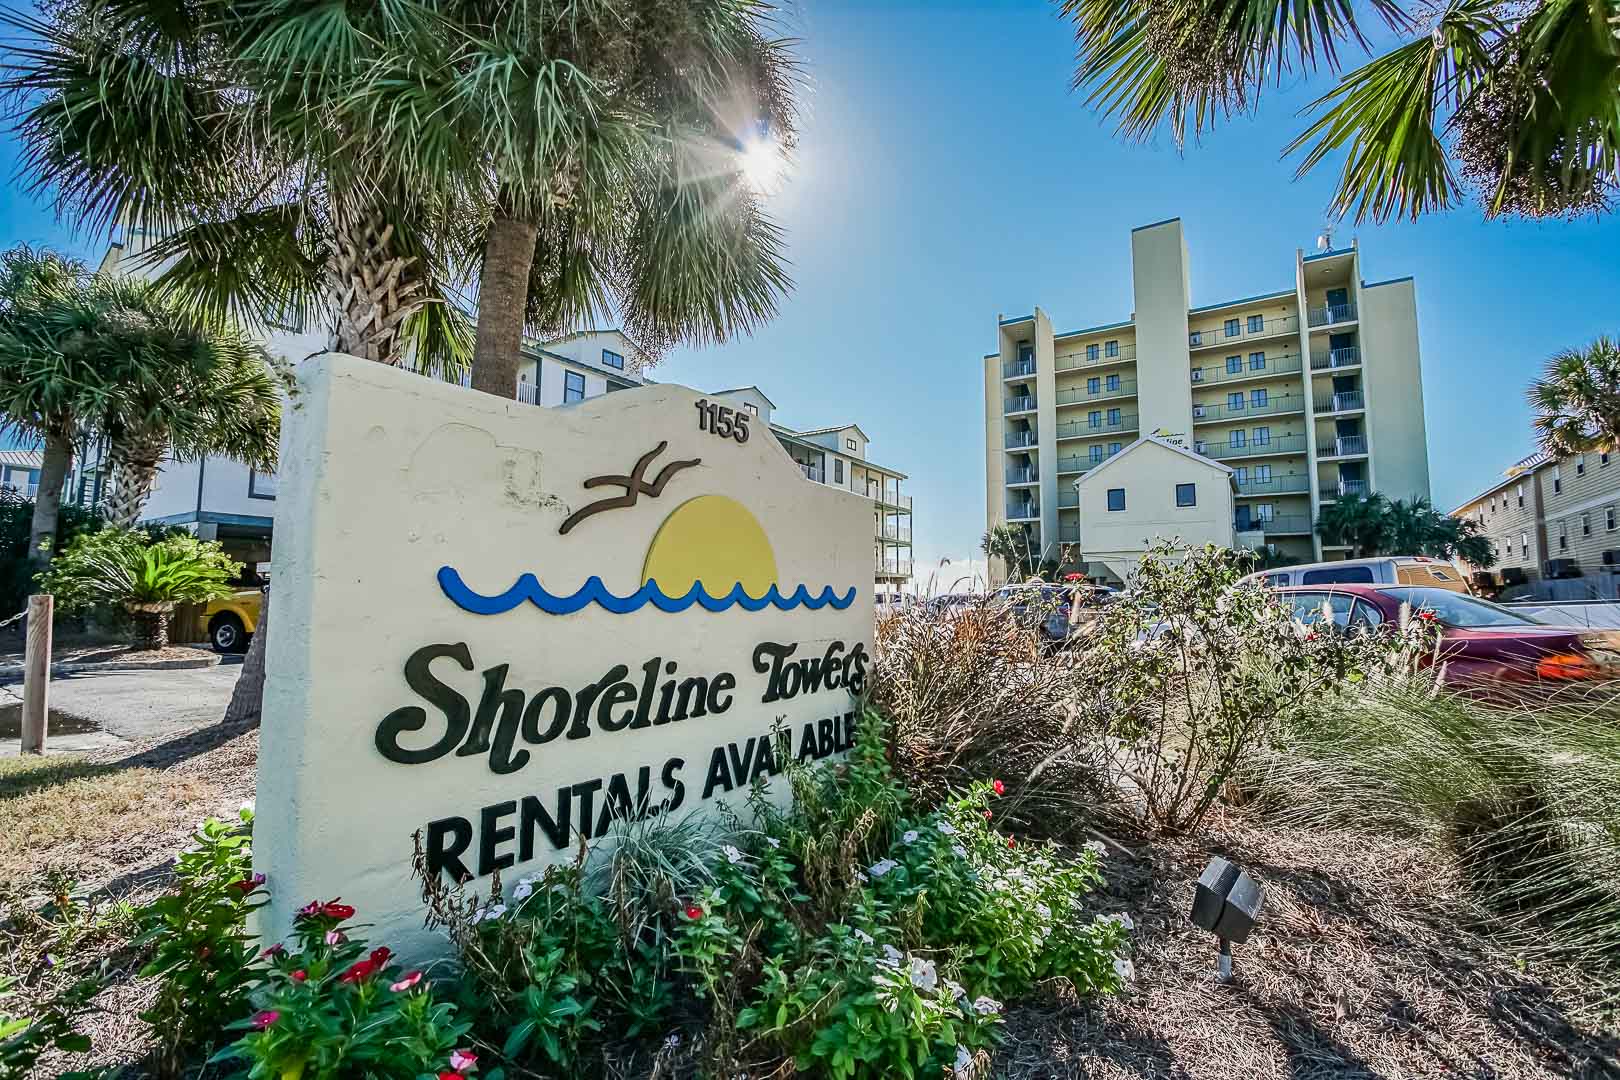 A vibrant resort signage at VRI's Shoreline Towers in Gulf Shores, Alabama.